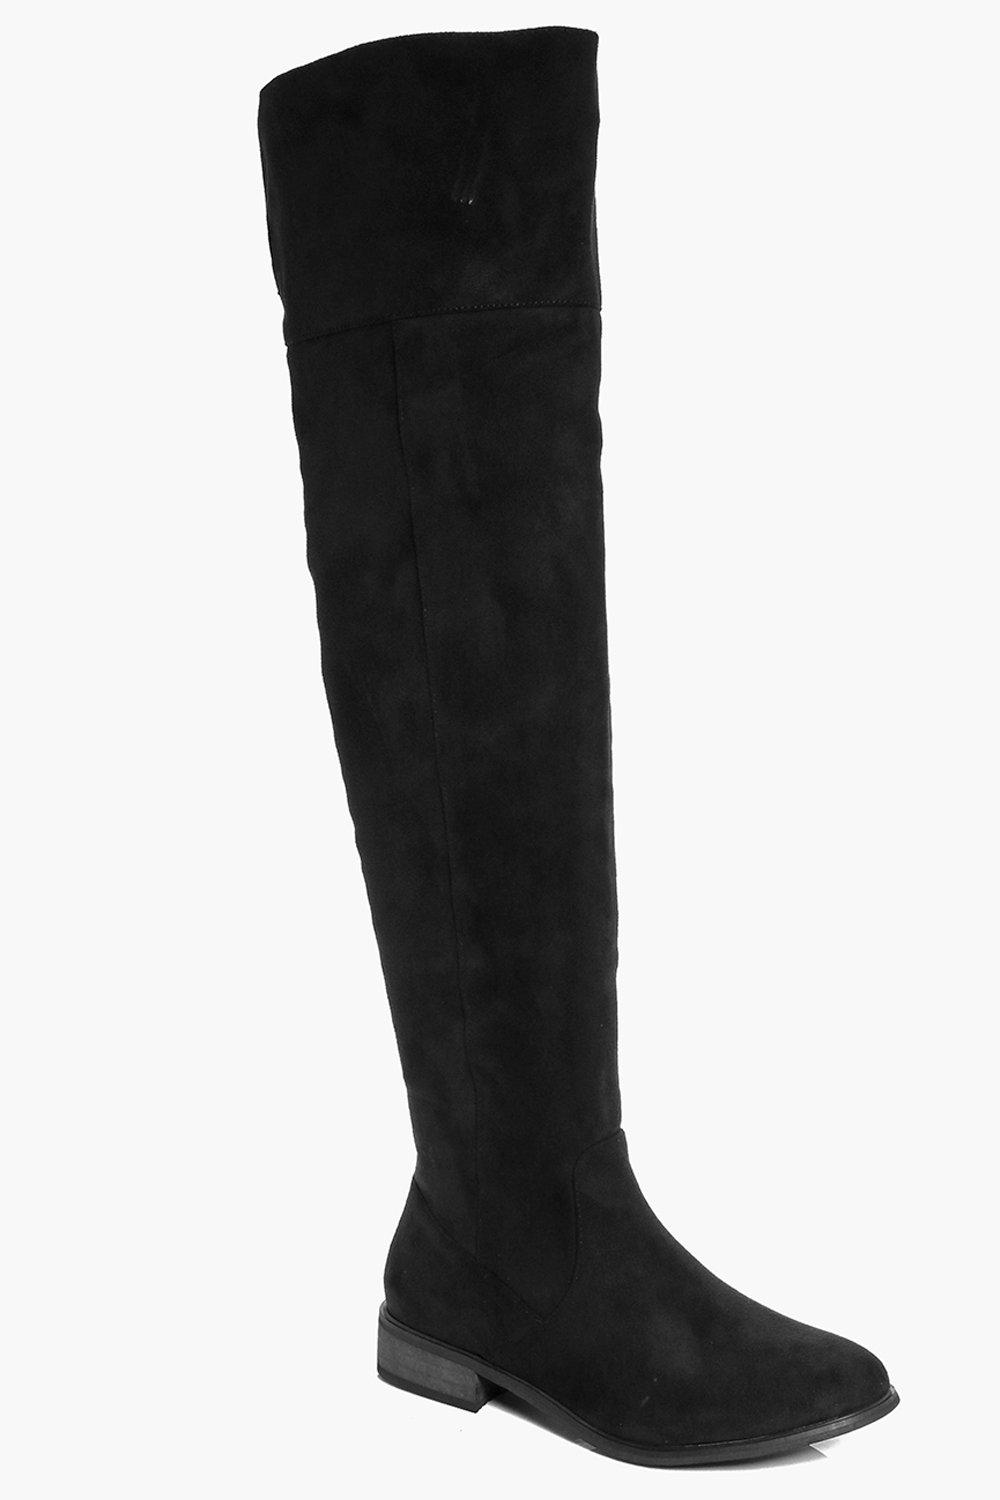 black over the knee flat boots